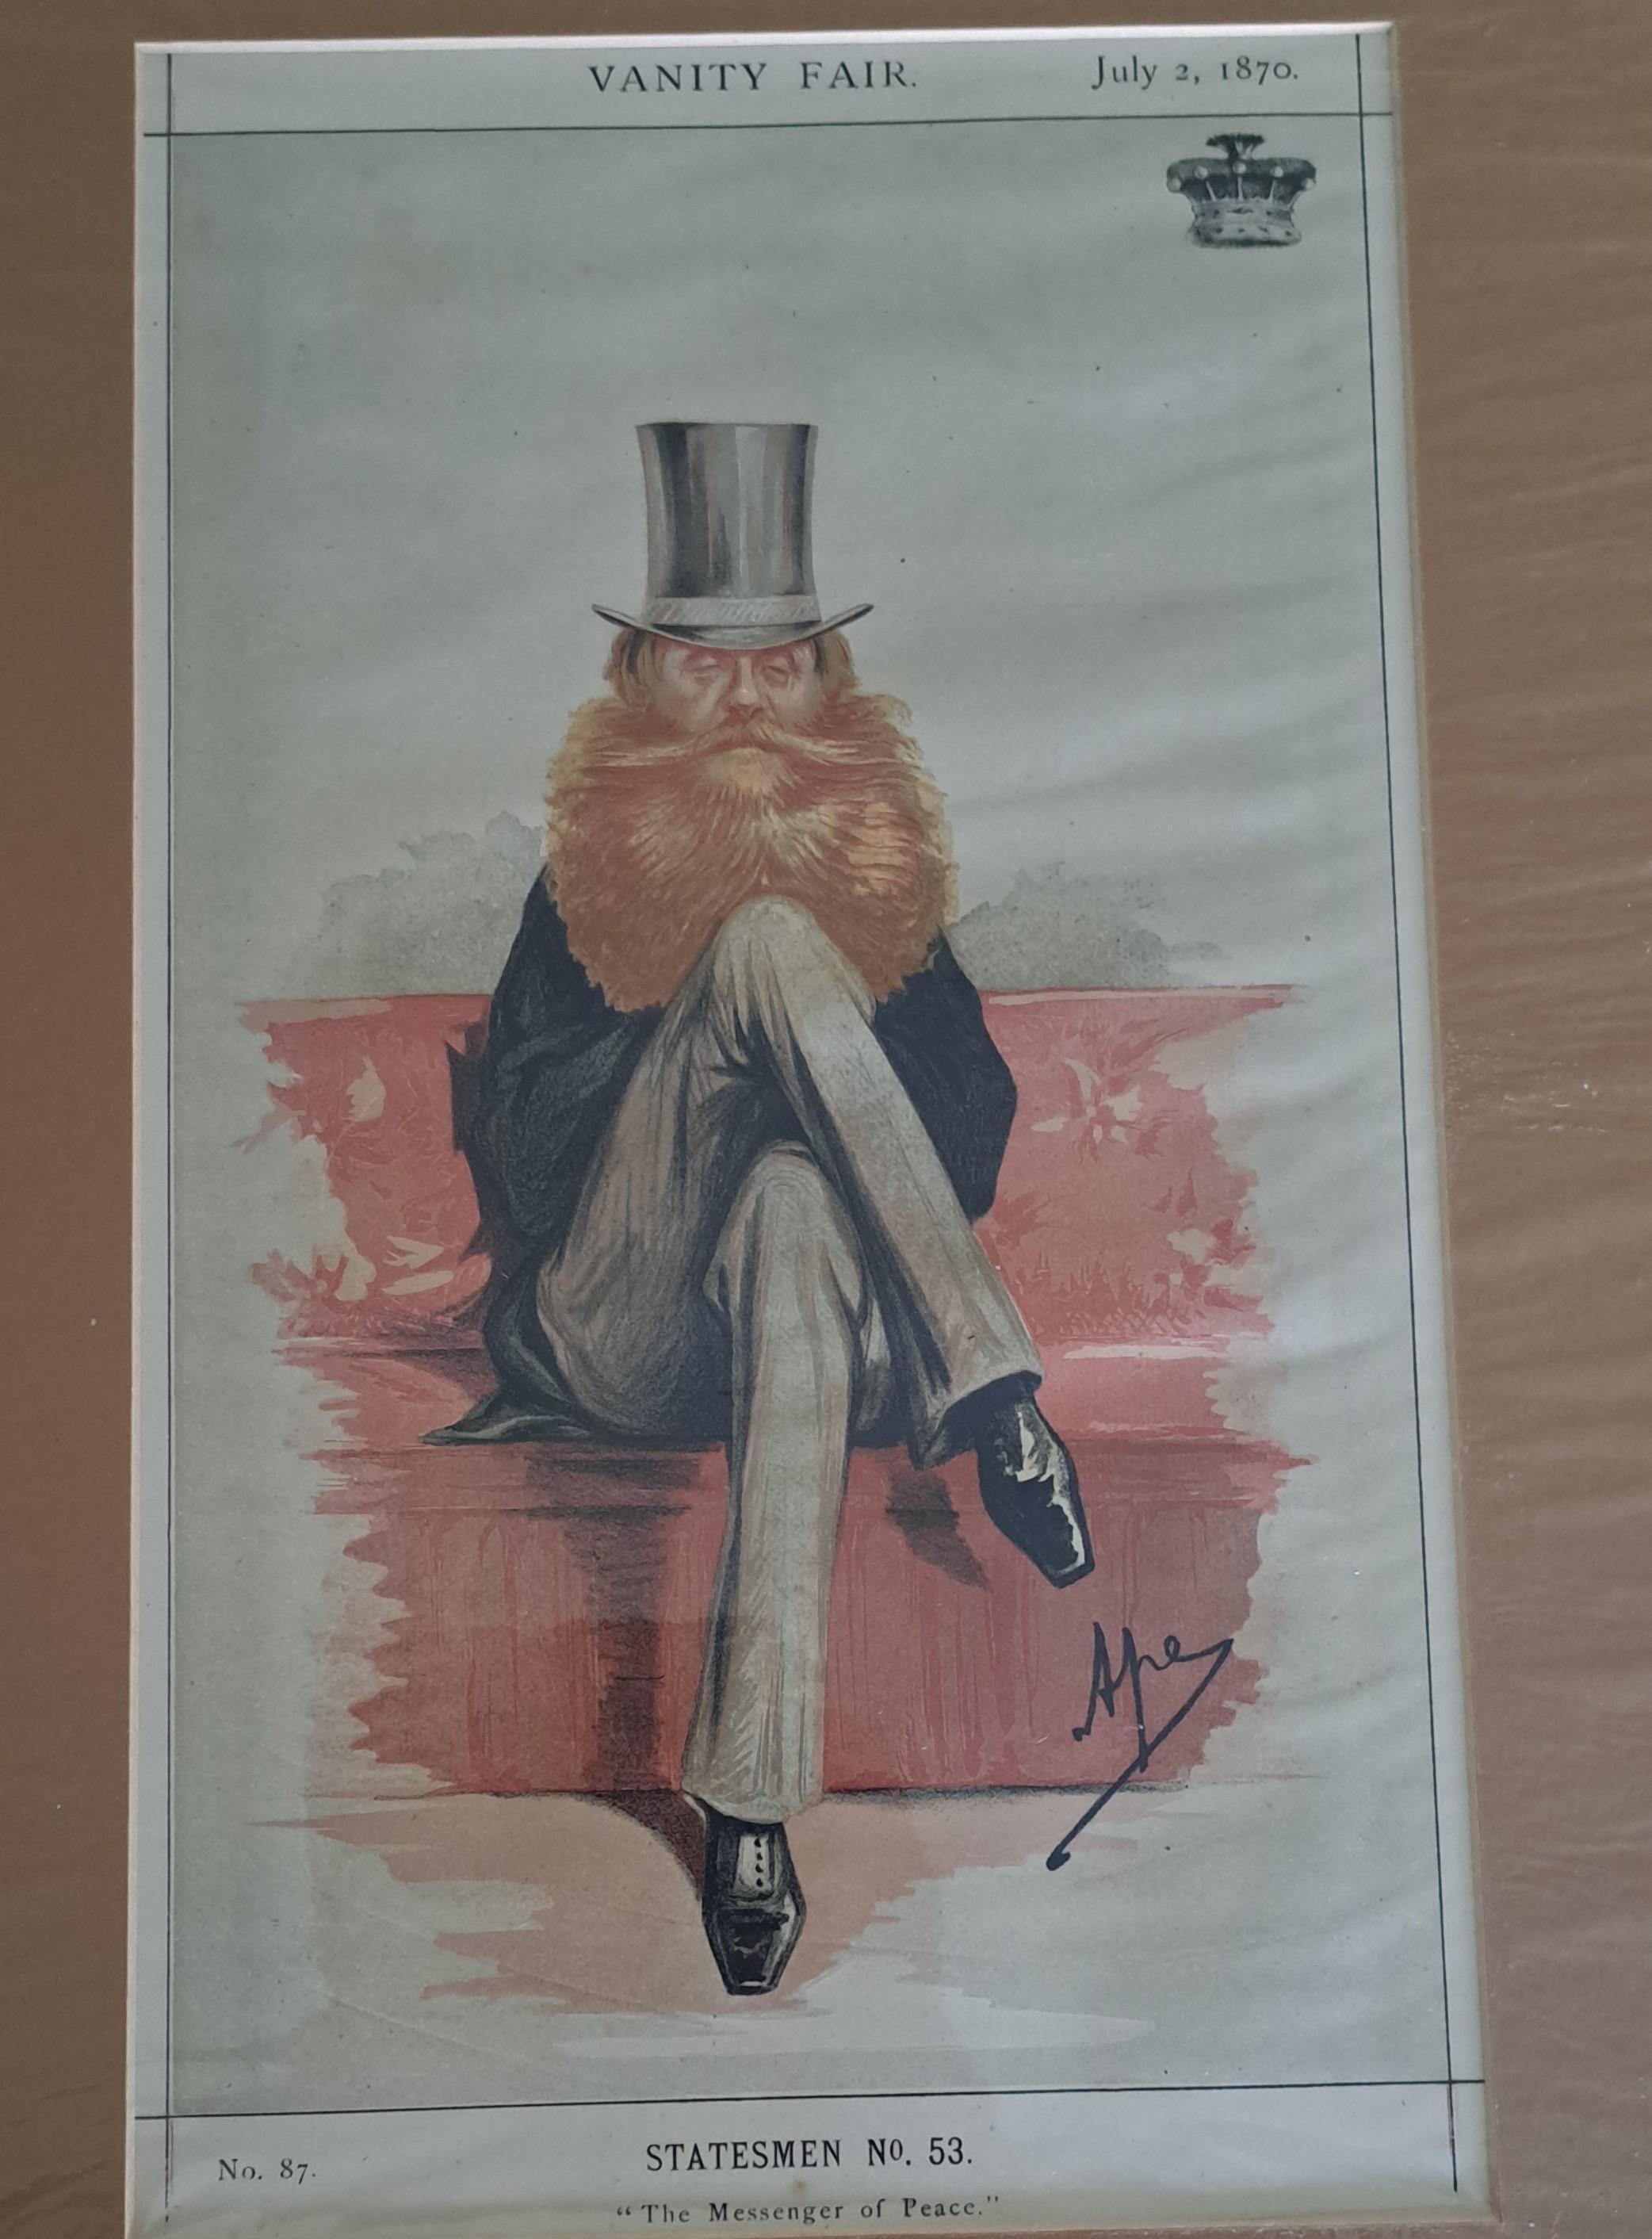 Vanity Fair Print, statesmen Earl Spencer
mounted size 49 x 34 cm in overall good condition unframed but comes with mount and description of sitter
 see below for details

I have a selection of vanity fair prints for sale acquired from a retailer